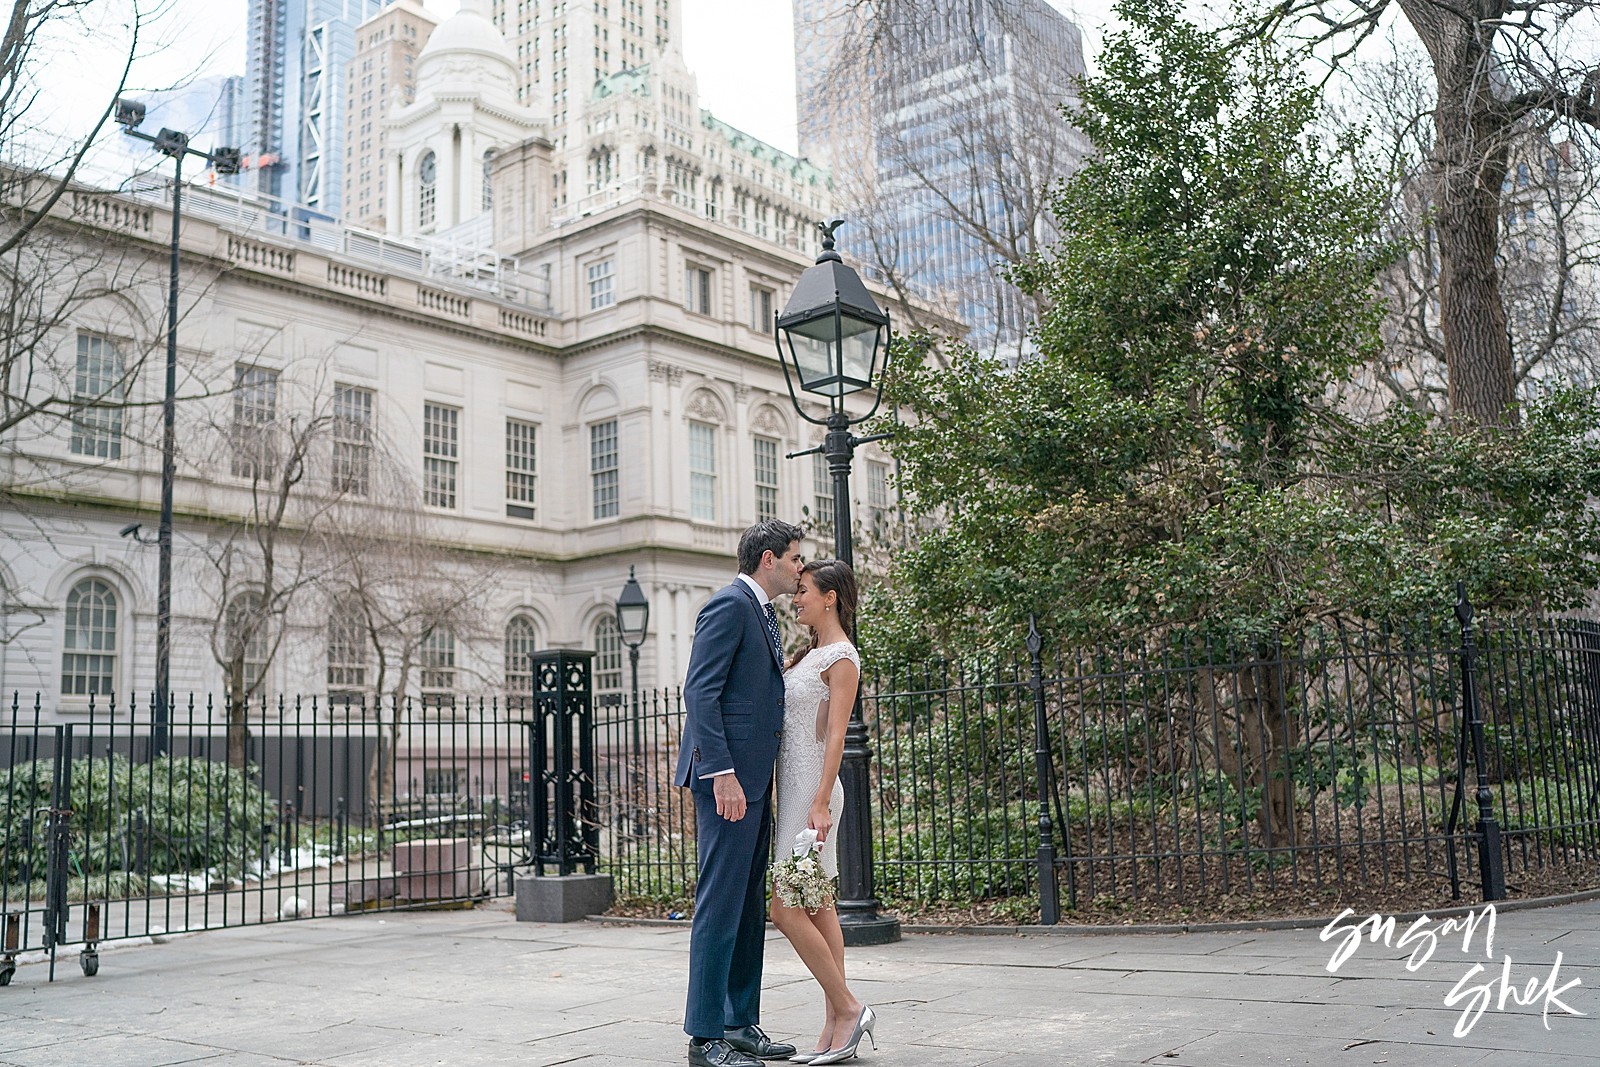 city hall wedding photographer, city hall weddings, courthouse wedding, city hall wedding photography, wedding photography, nyc wedding photographer, elopement, eloping in new york, eloping at city hall